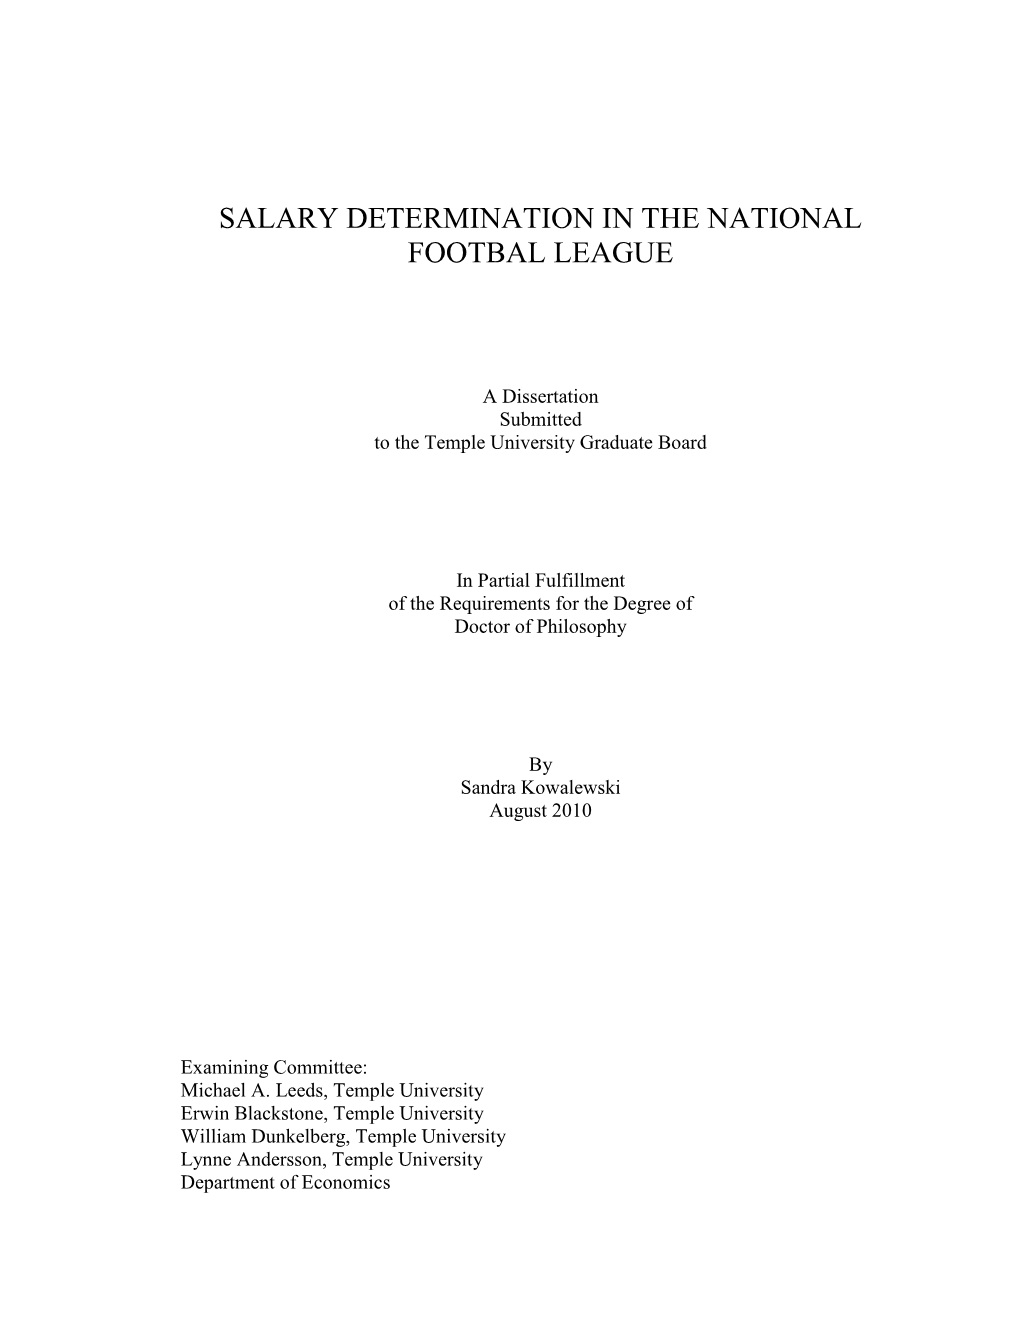 Salary Determination in the National Football League (NFL)